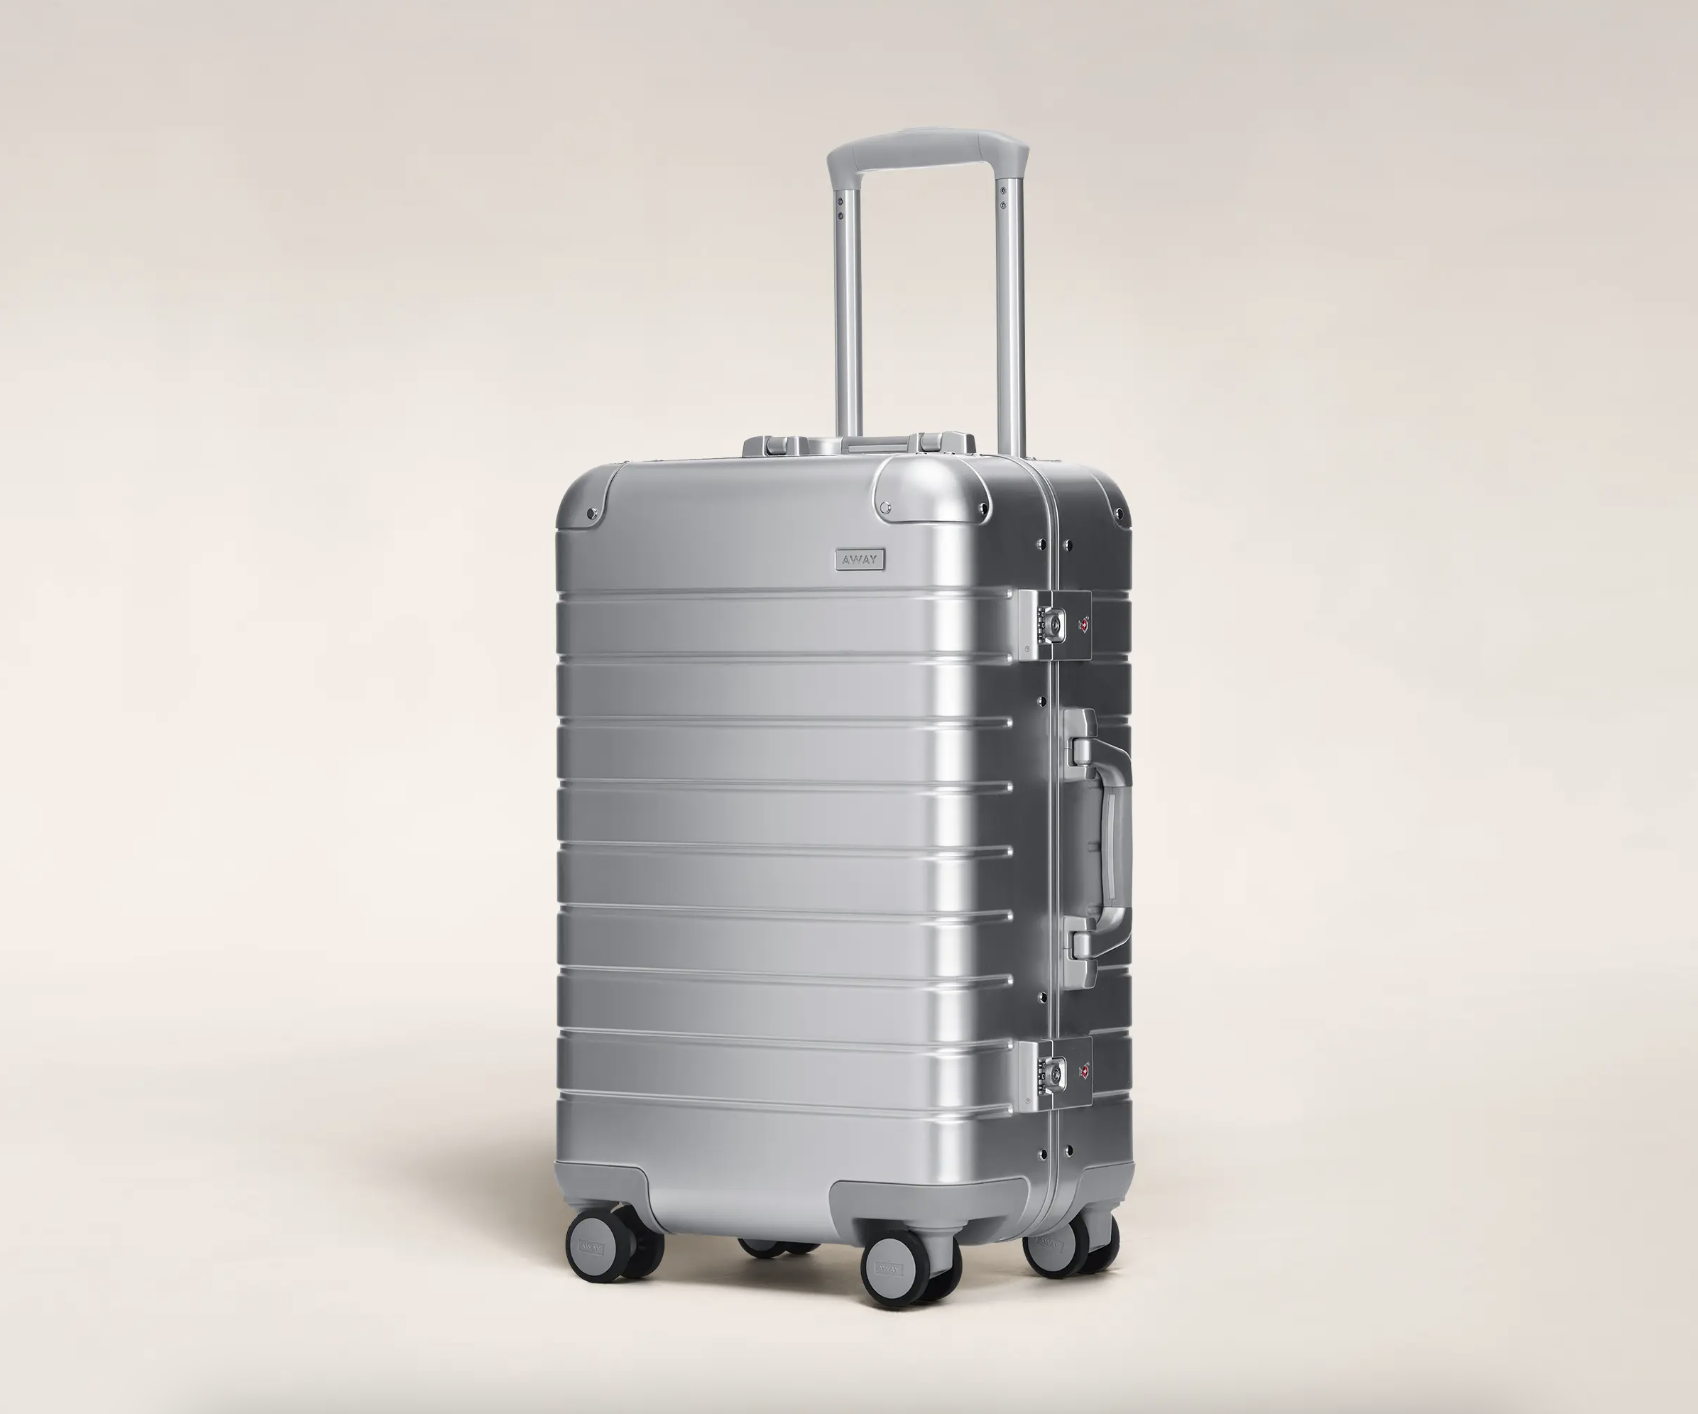 7 Rimowa Dupes That Give You Luxury for Less